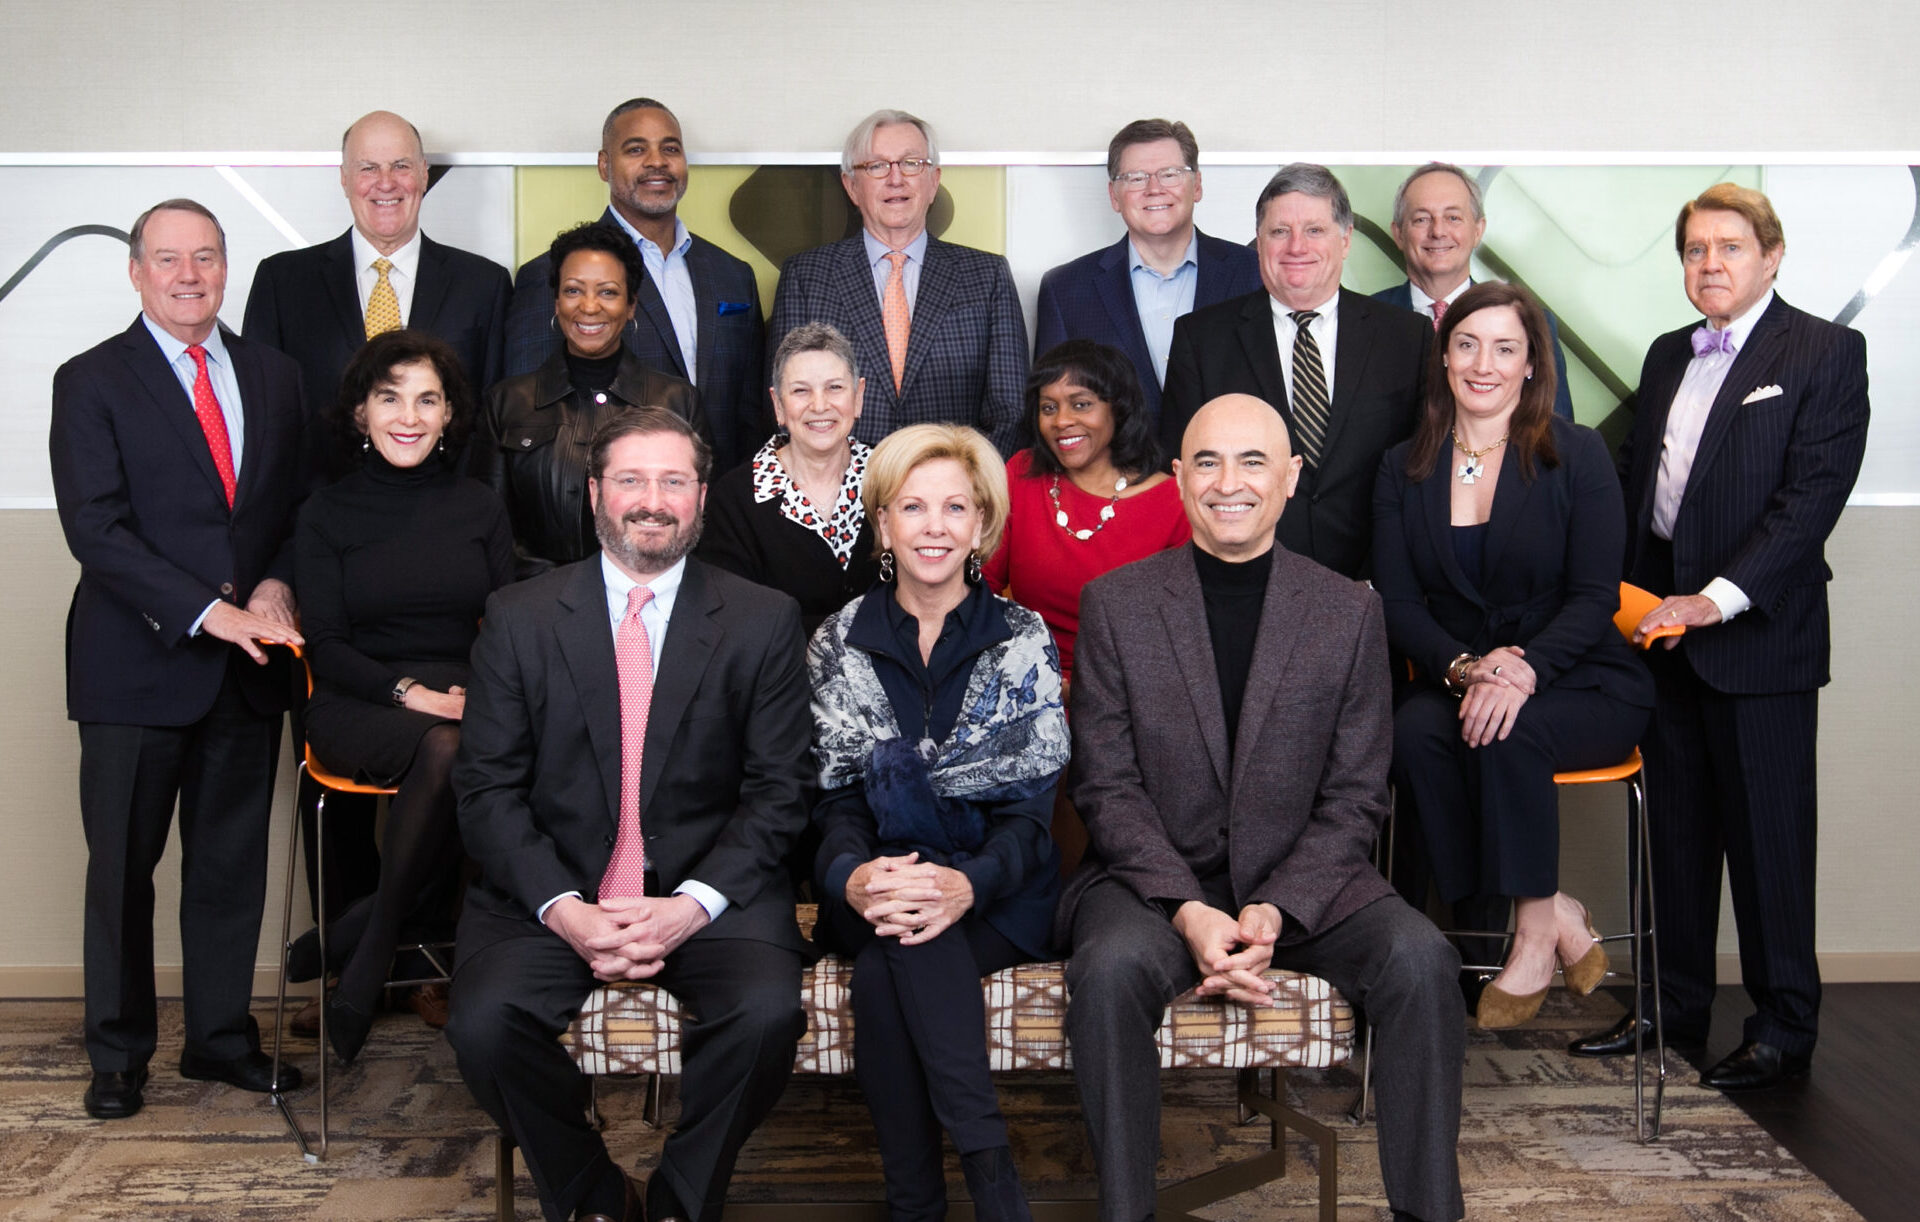 Featured image for “Community Foundation celebrates dynamic Board of Directors leadership of Greer, Muir, Reid, Stockert and Tome’ and announces seven new Board members joining in 2021”